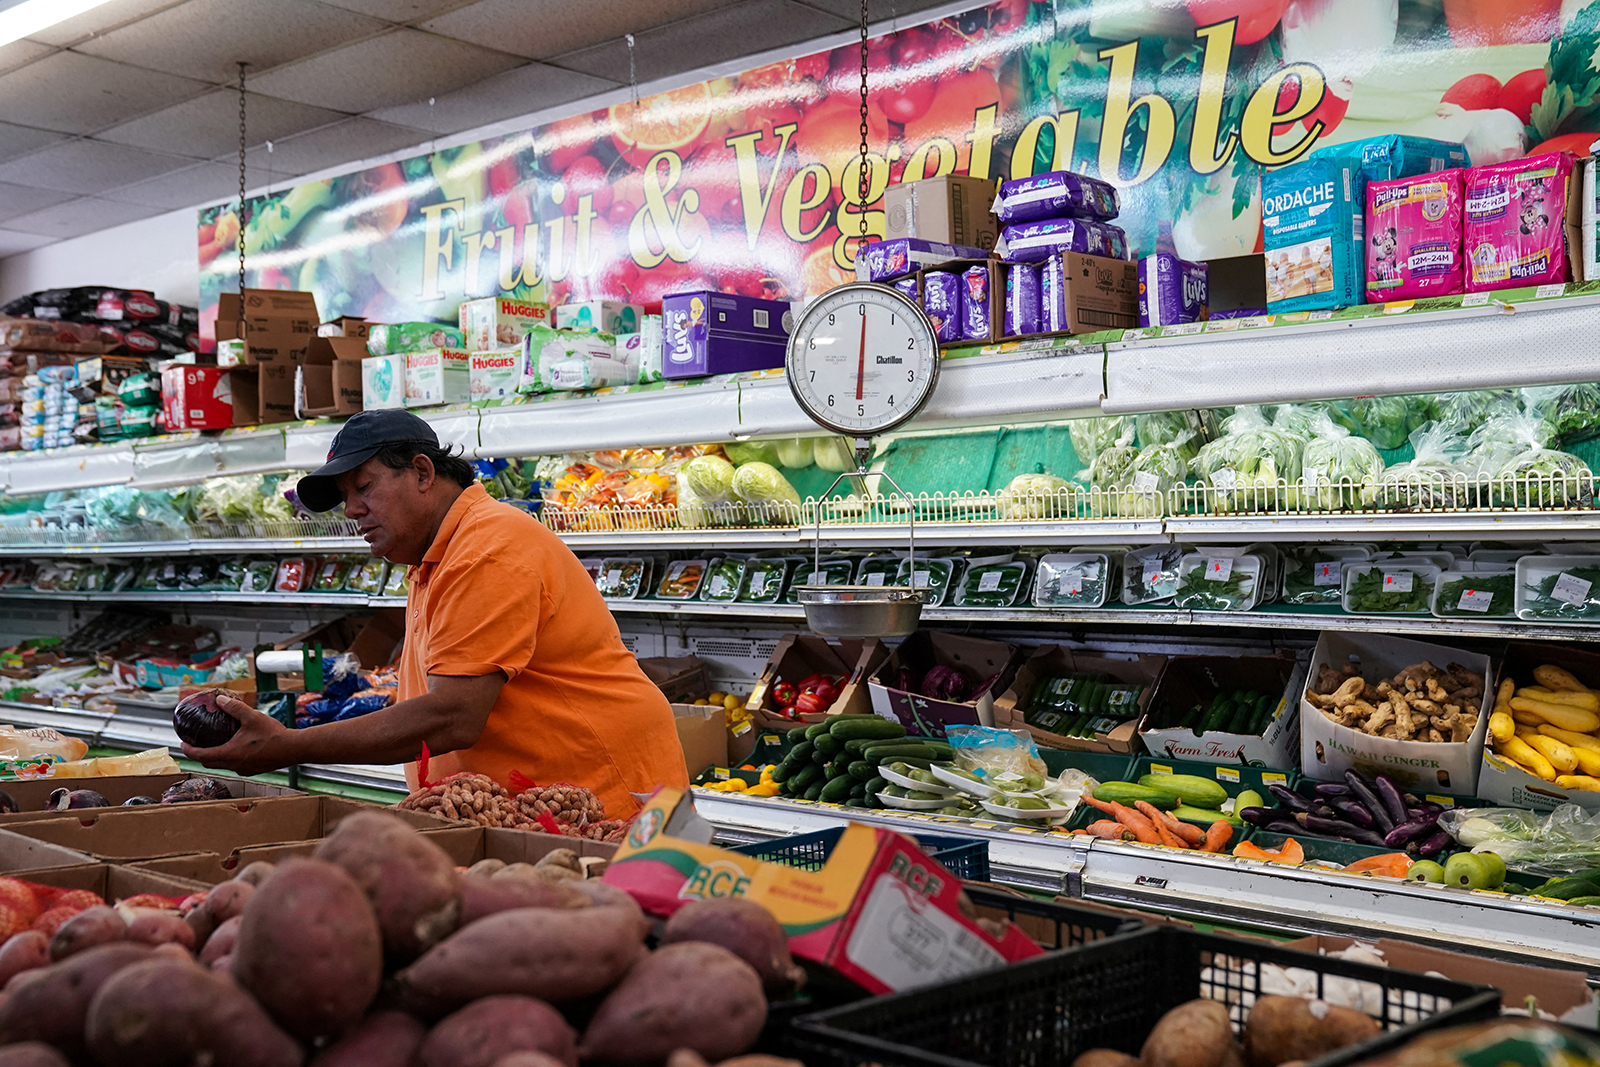 A man shops for produce at a supermarket in Washington, D.C., on August 19.